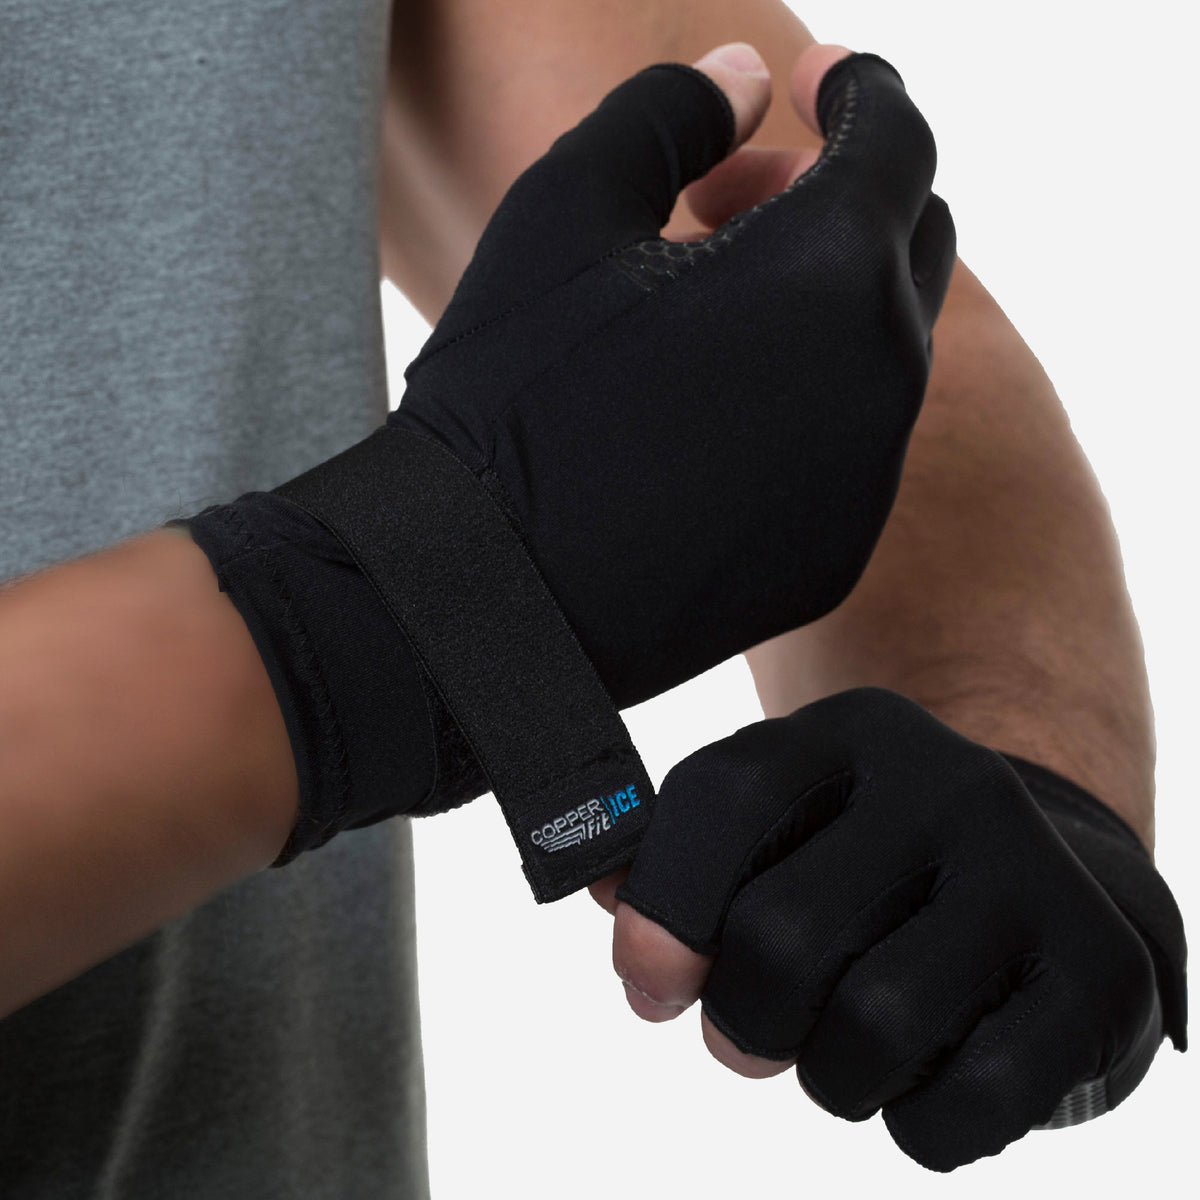 Copper Fit ICE Compression Gloves Infused with Menthol and Coq10 for  Recovery, Black Small/Medium Black